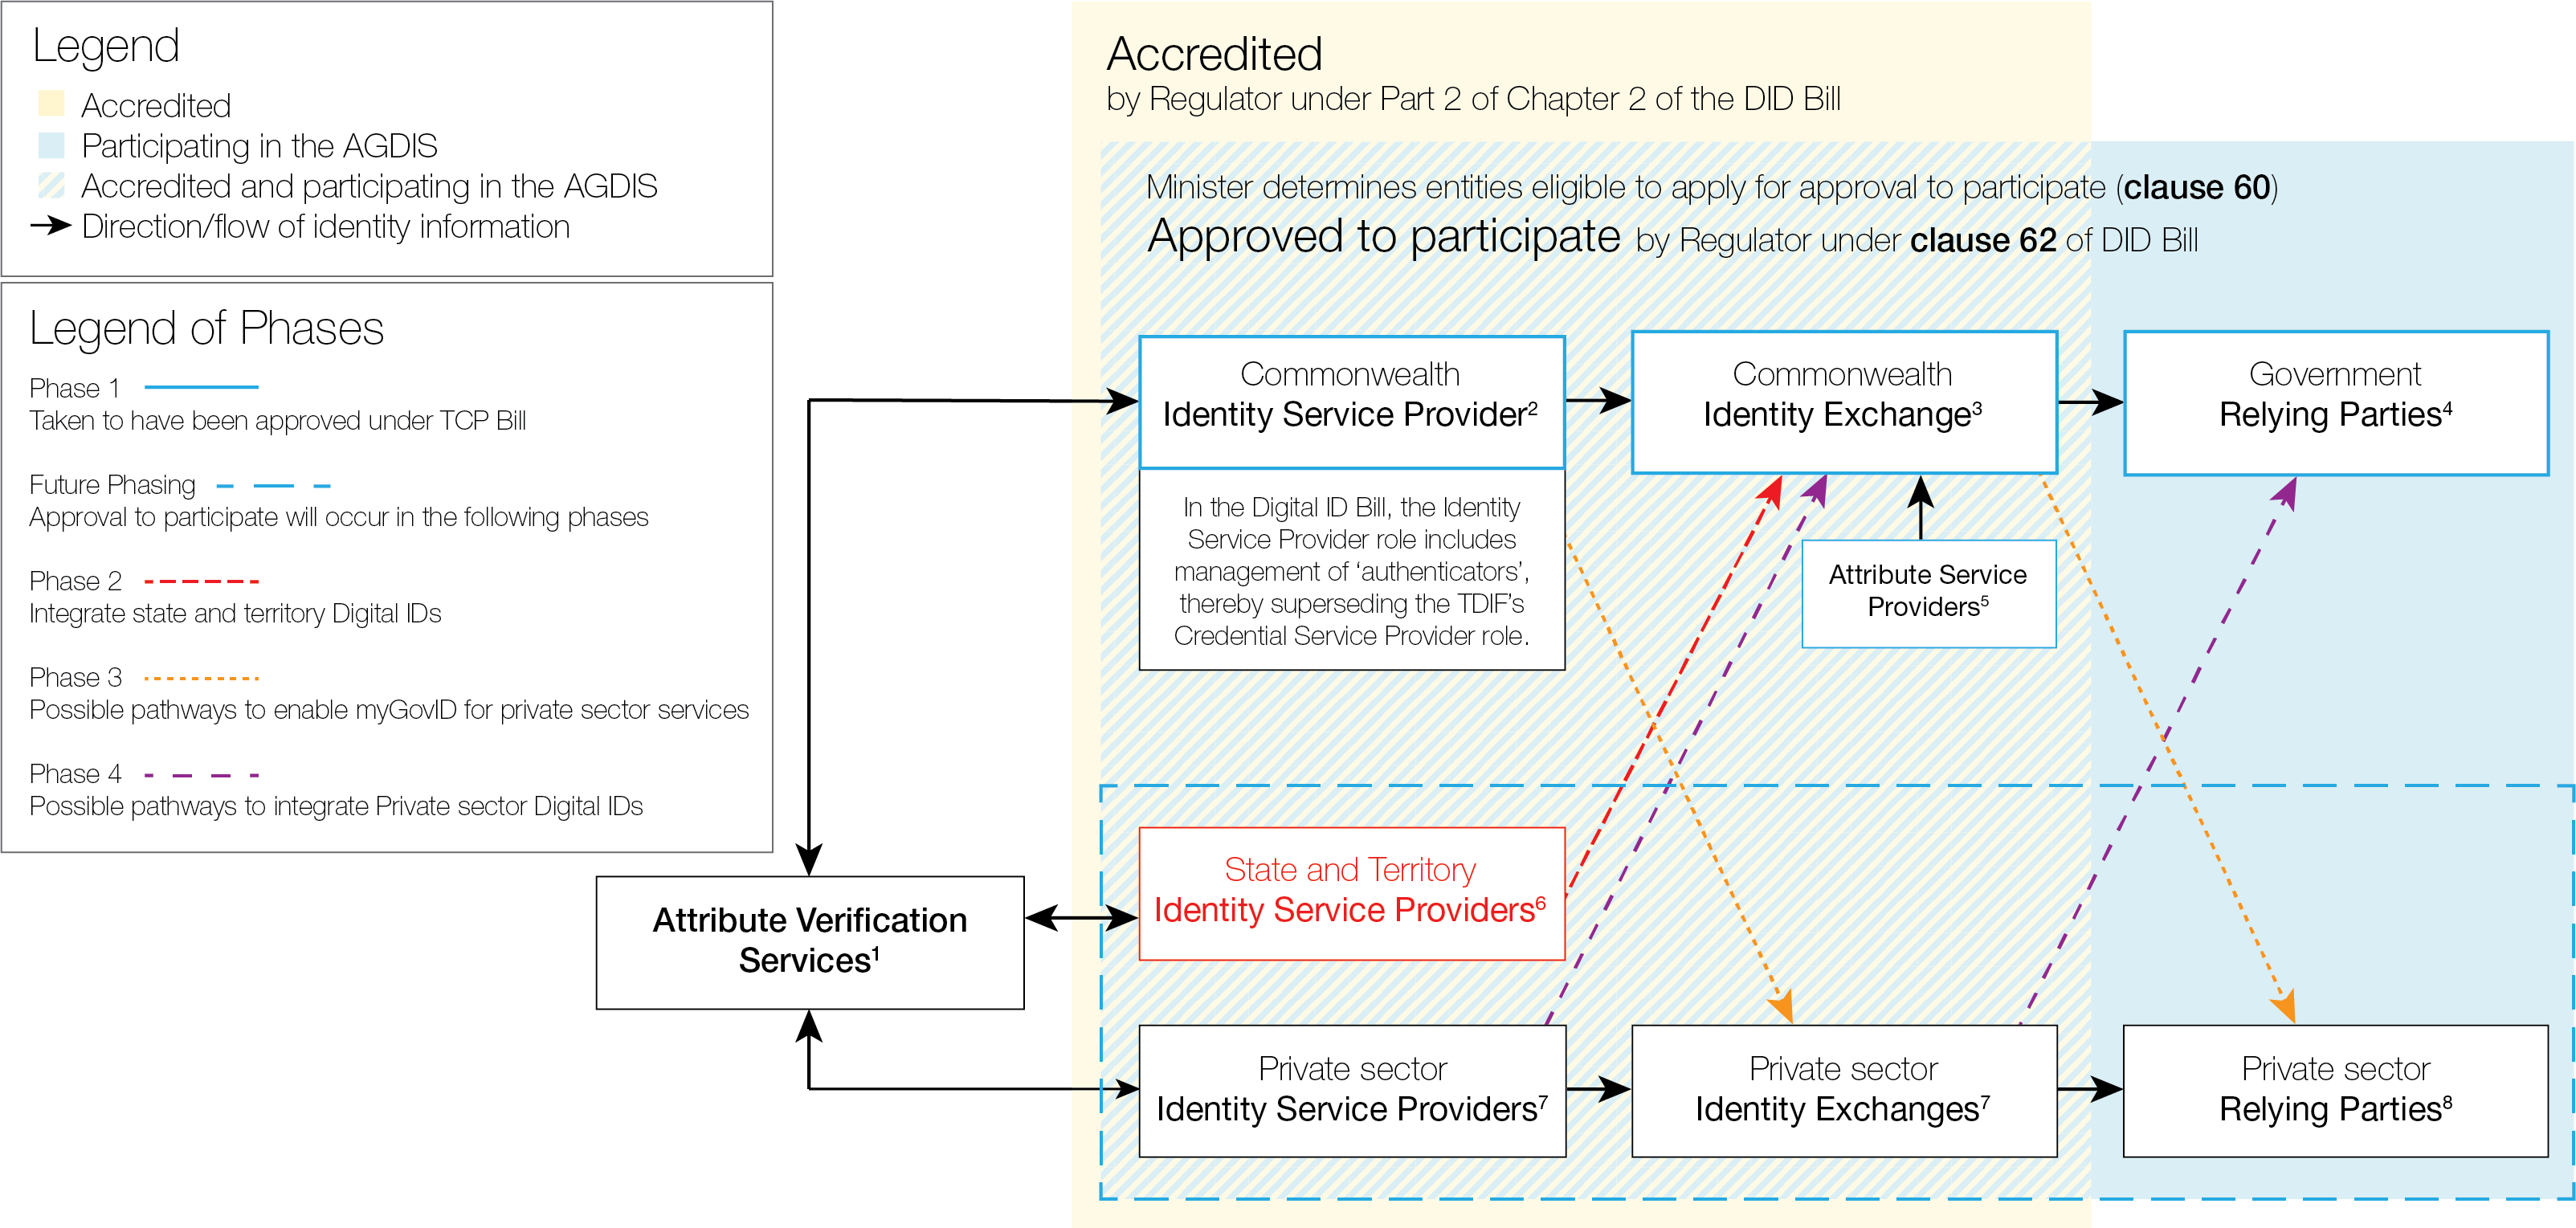 Figure 4: Potential phasing-in of approval to participate in the AGDIS under the DID Bill